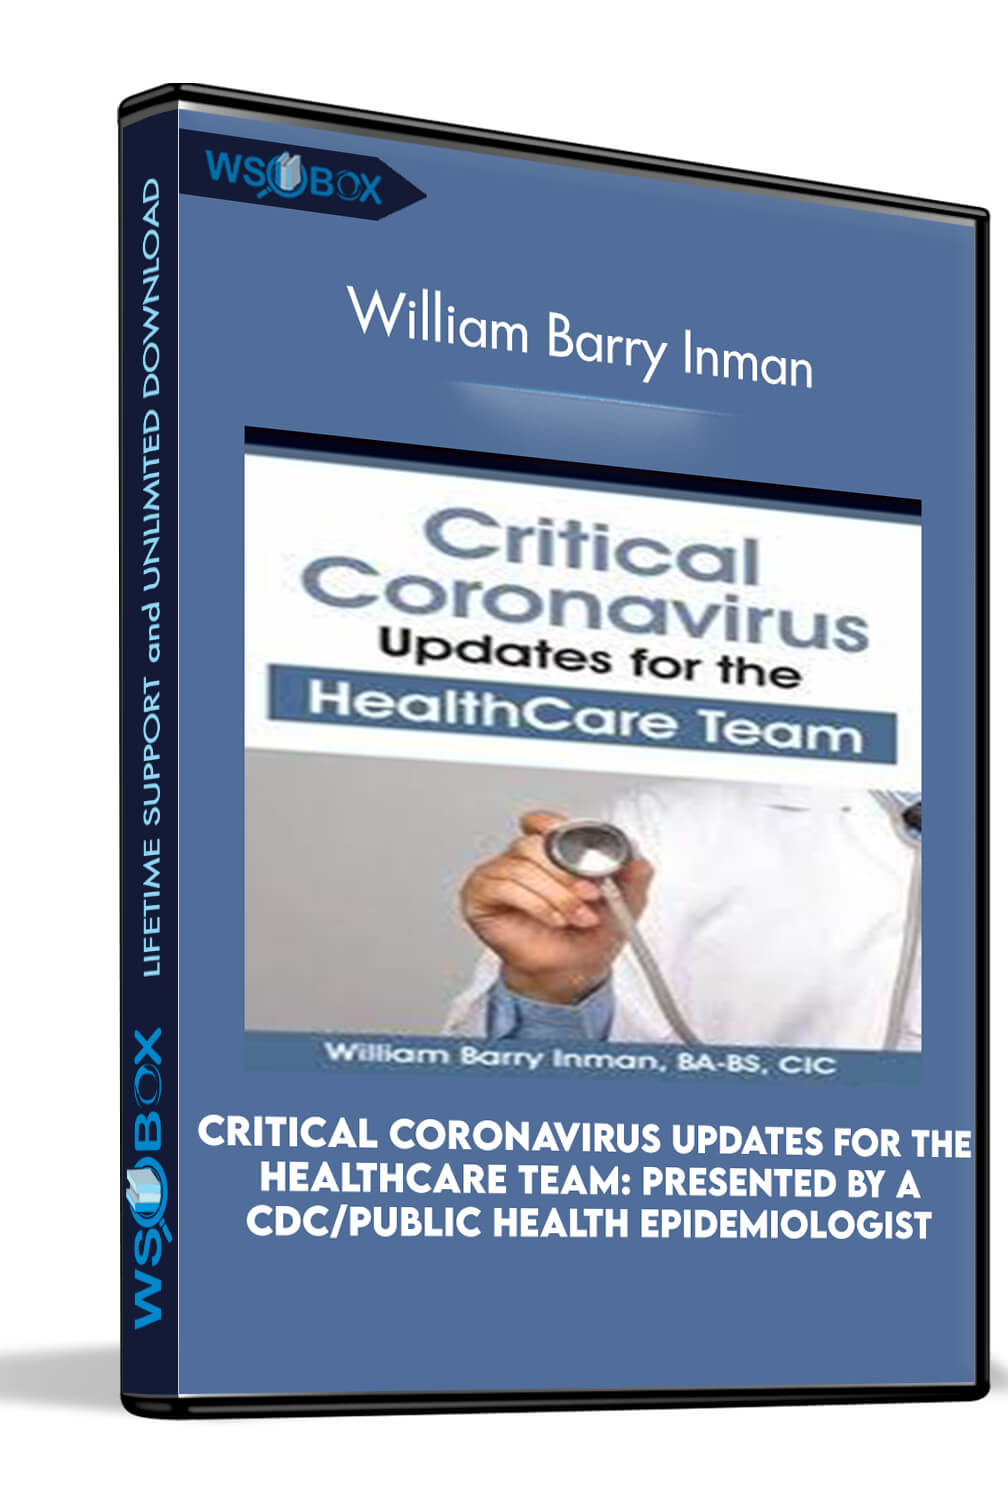 Critical Coronavirus Updates for the Healthcare Team: Presented by a CDC/Public Health Epidemiologist – William Barry Inman